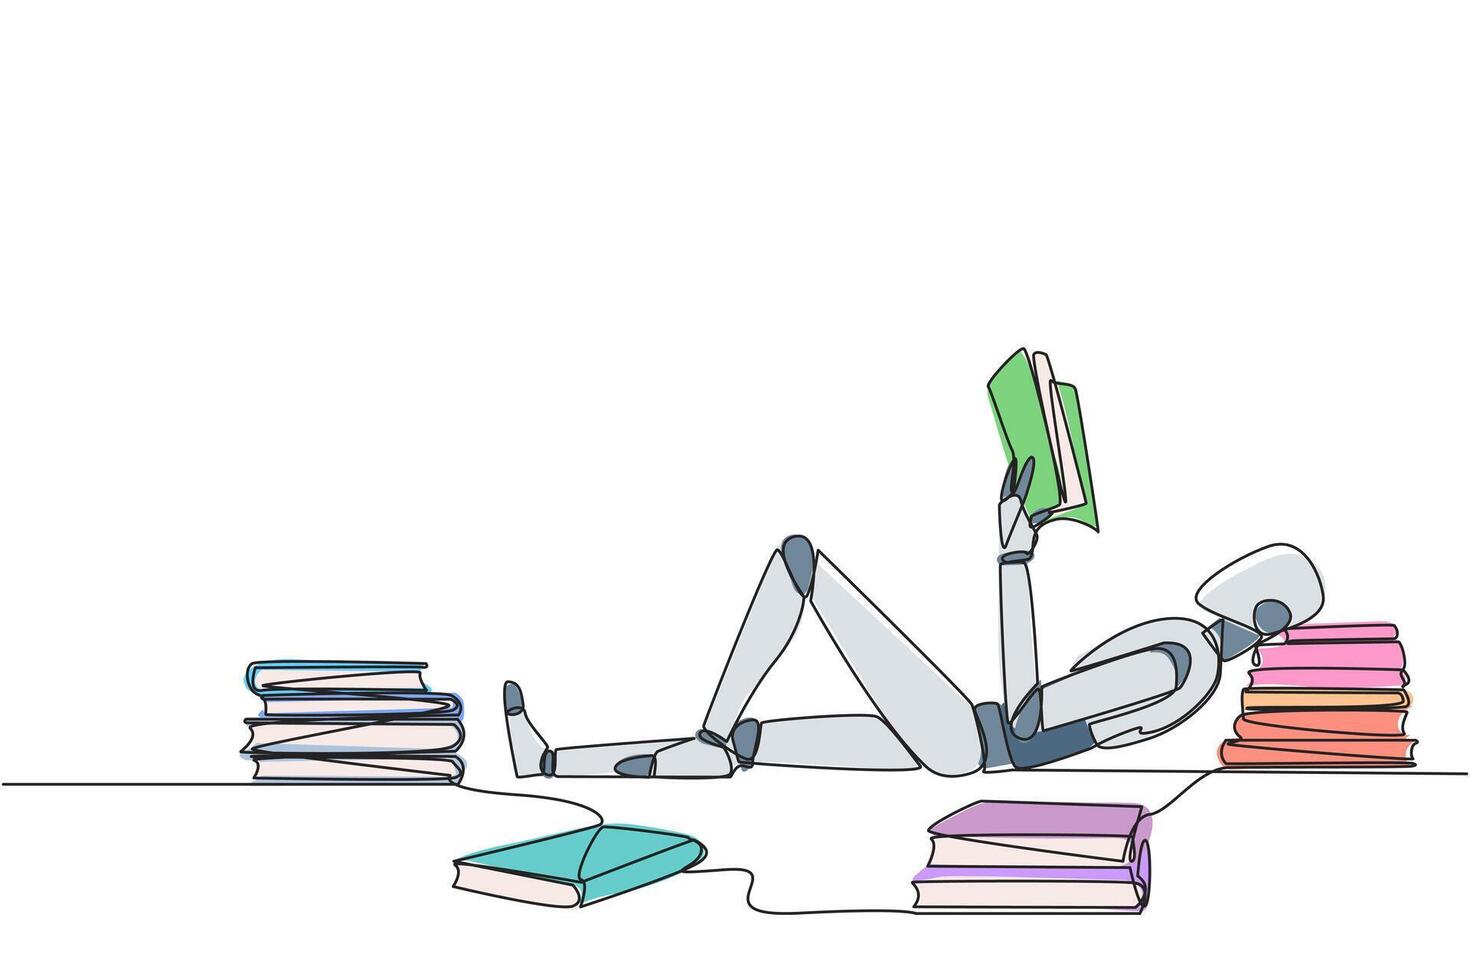 Single one line drawing smart robot lying down reading a book. Lots of books scattered around. Hobby reading. Technology book festival concept. Future AI. Continuous line design graphic illustration vector